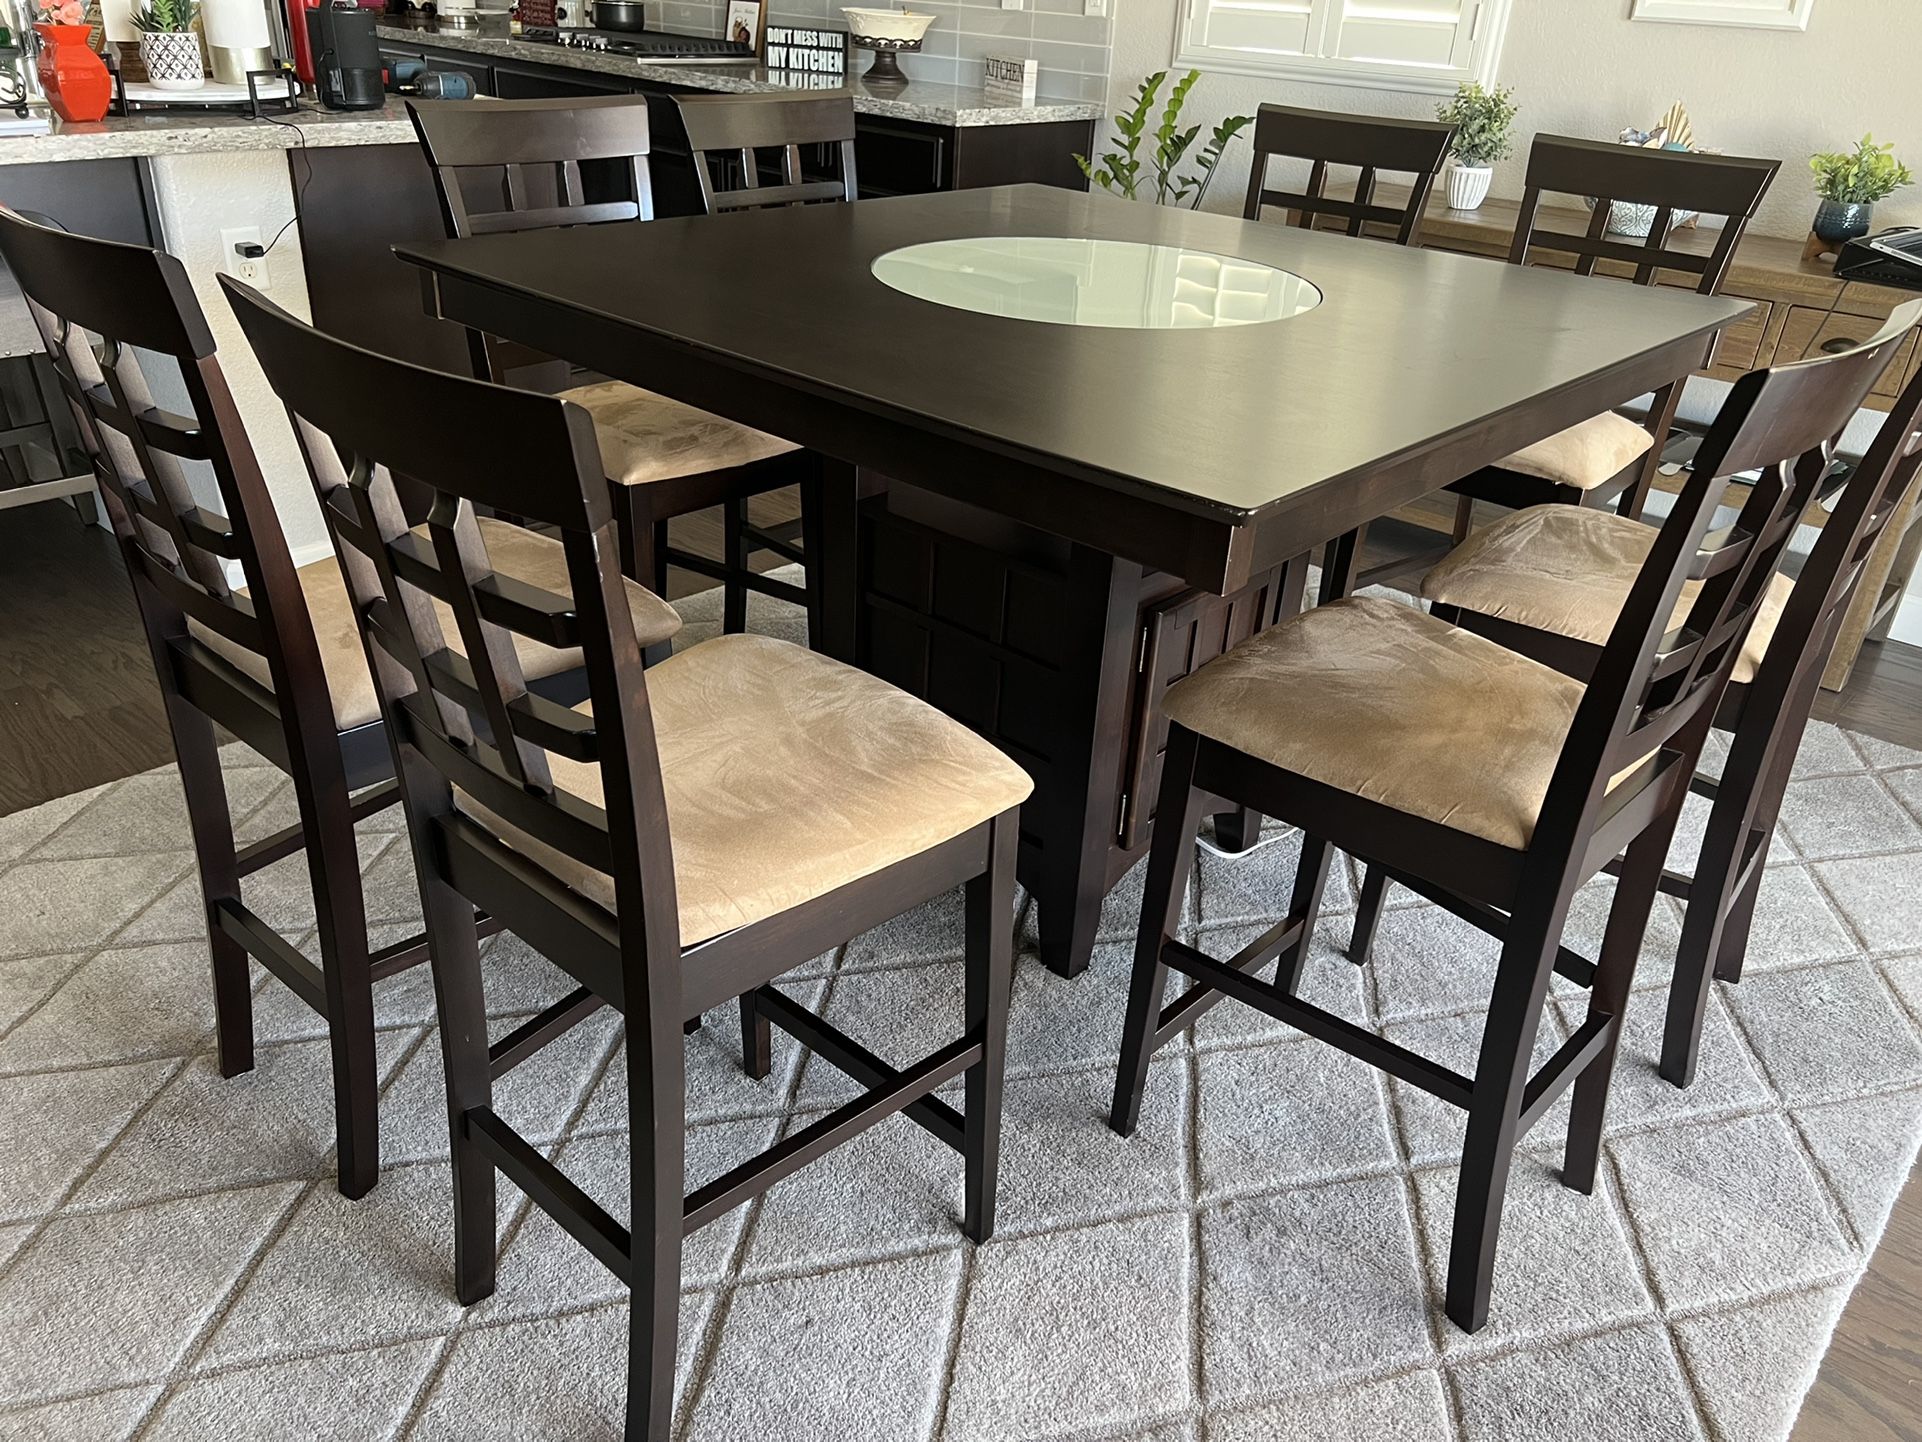 Nook - Breakfast - Dining Table With 8 Chairs Furniture